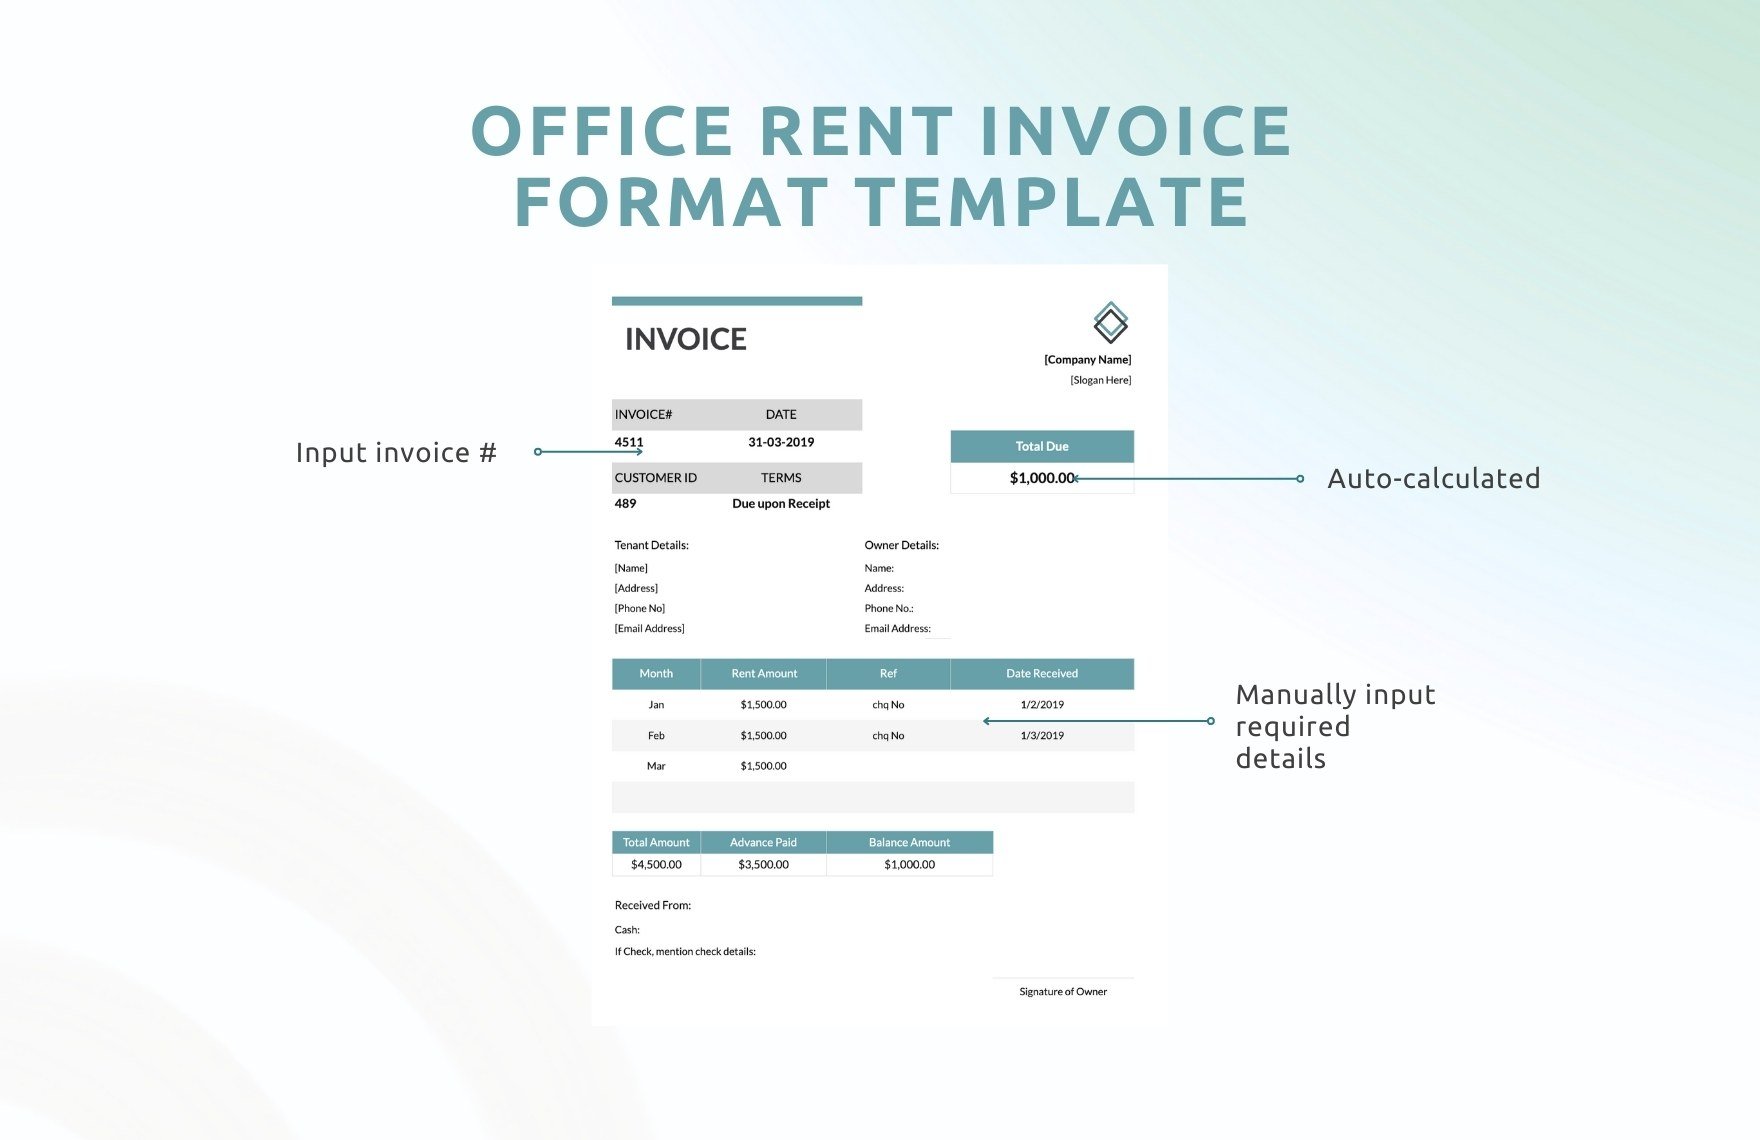 Office Rent Invoice Format Template